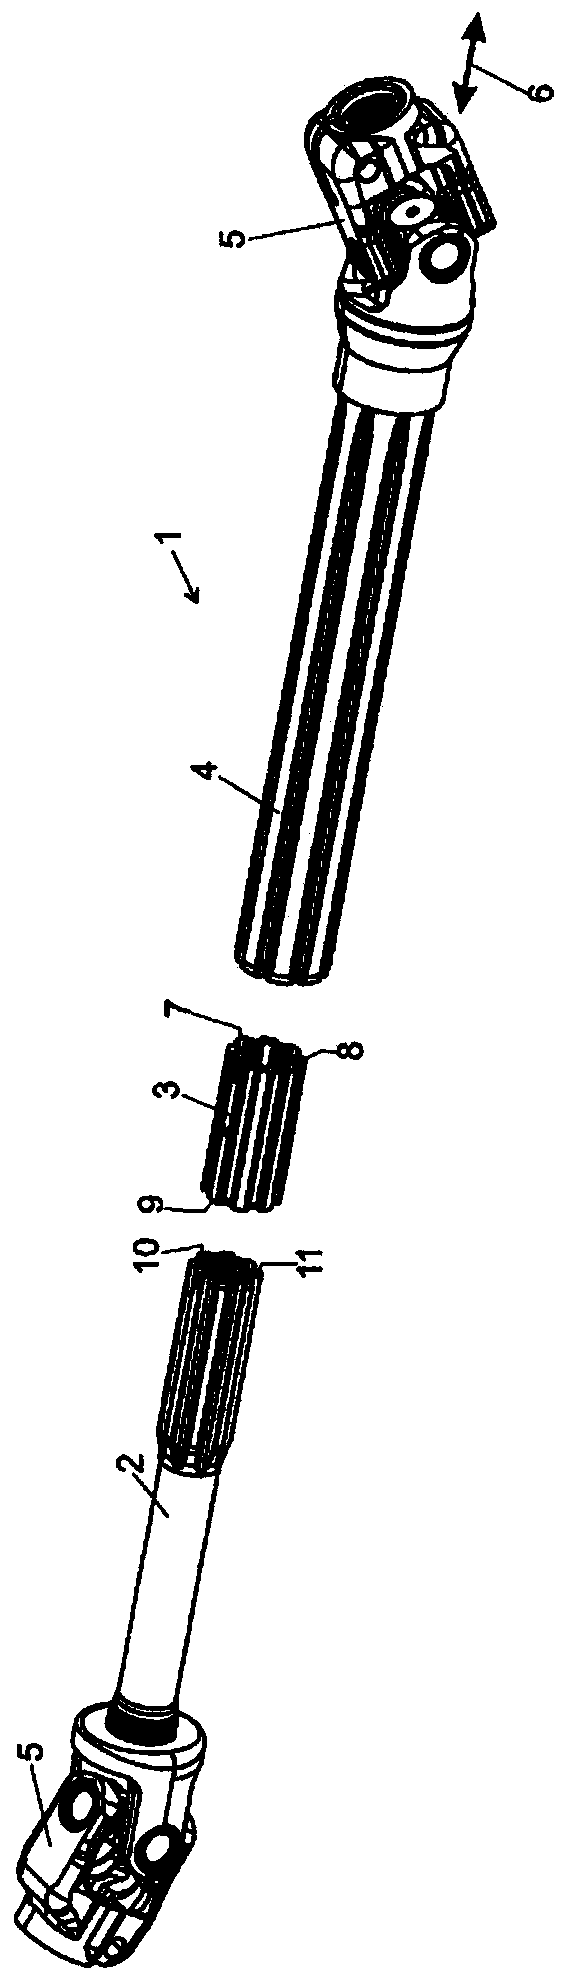 Length-adjustable steering shaft for a motor vehicle, and profiled sleeve for a steering shaft